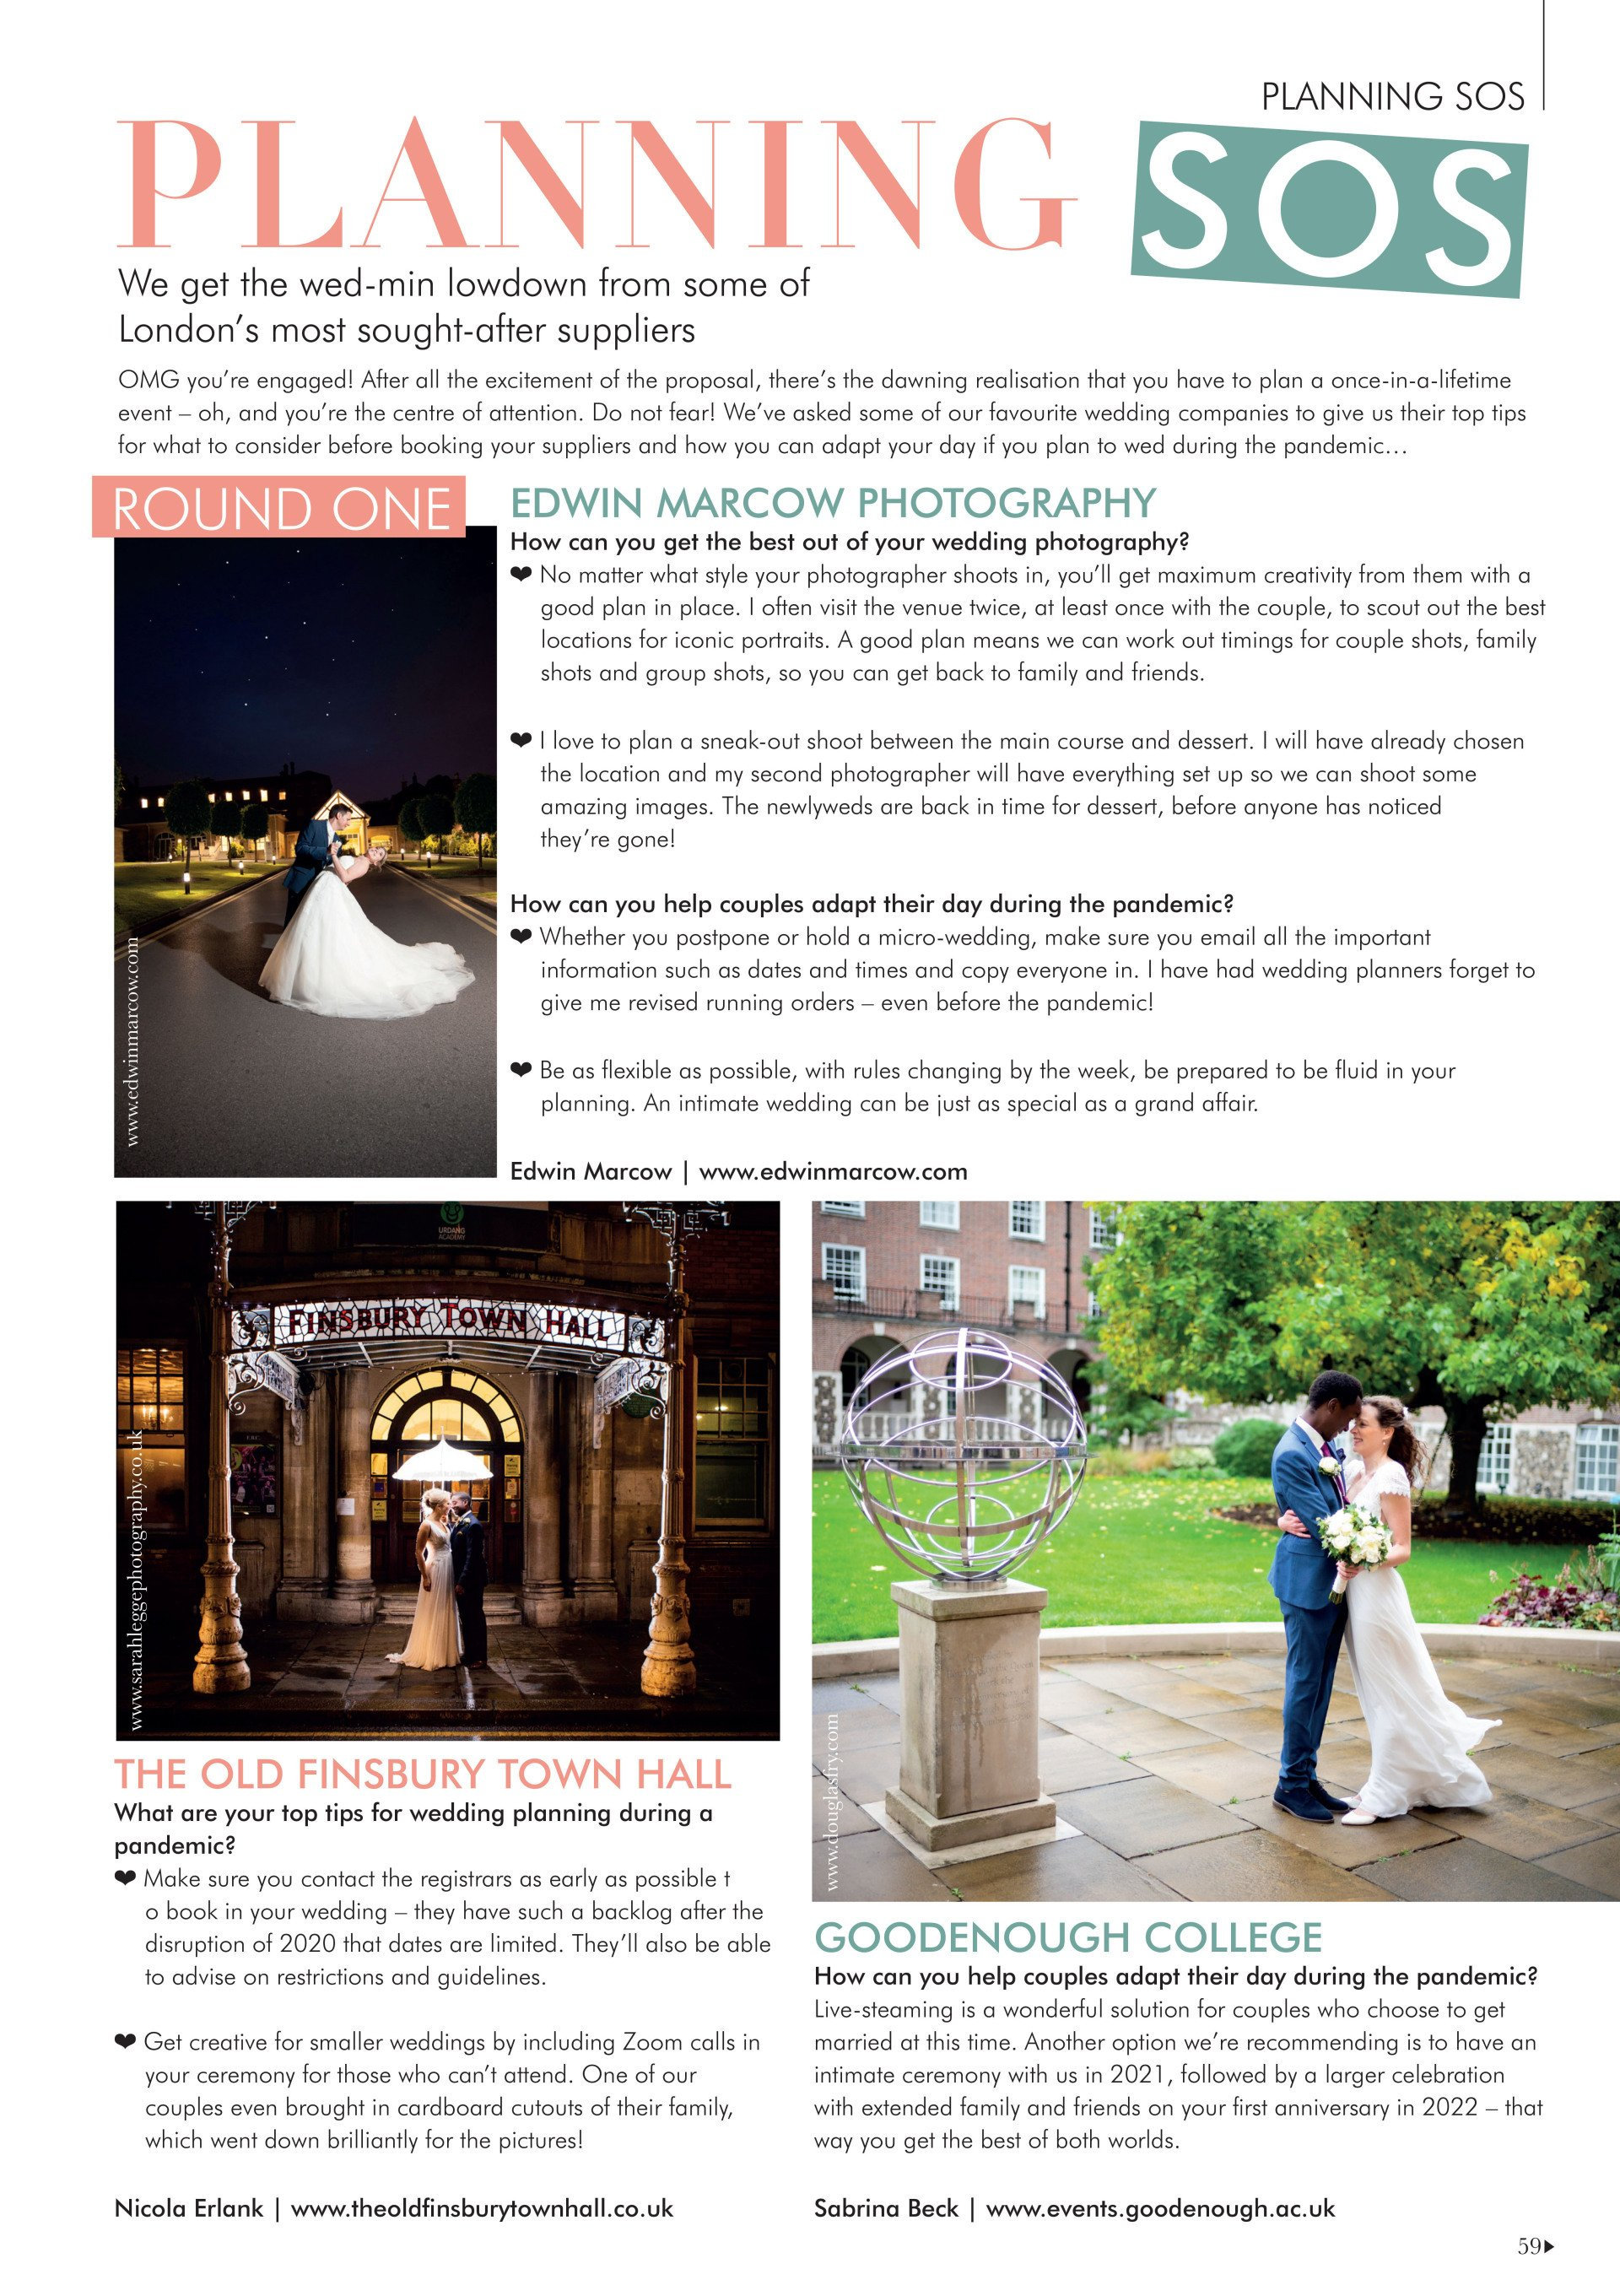 Your London Wedding magazine wedding feature full of expert advice and top tips